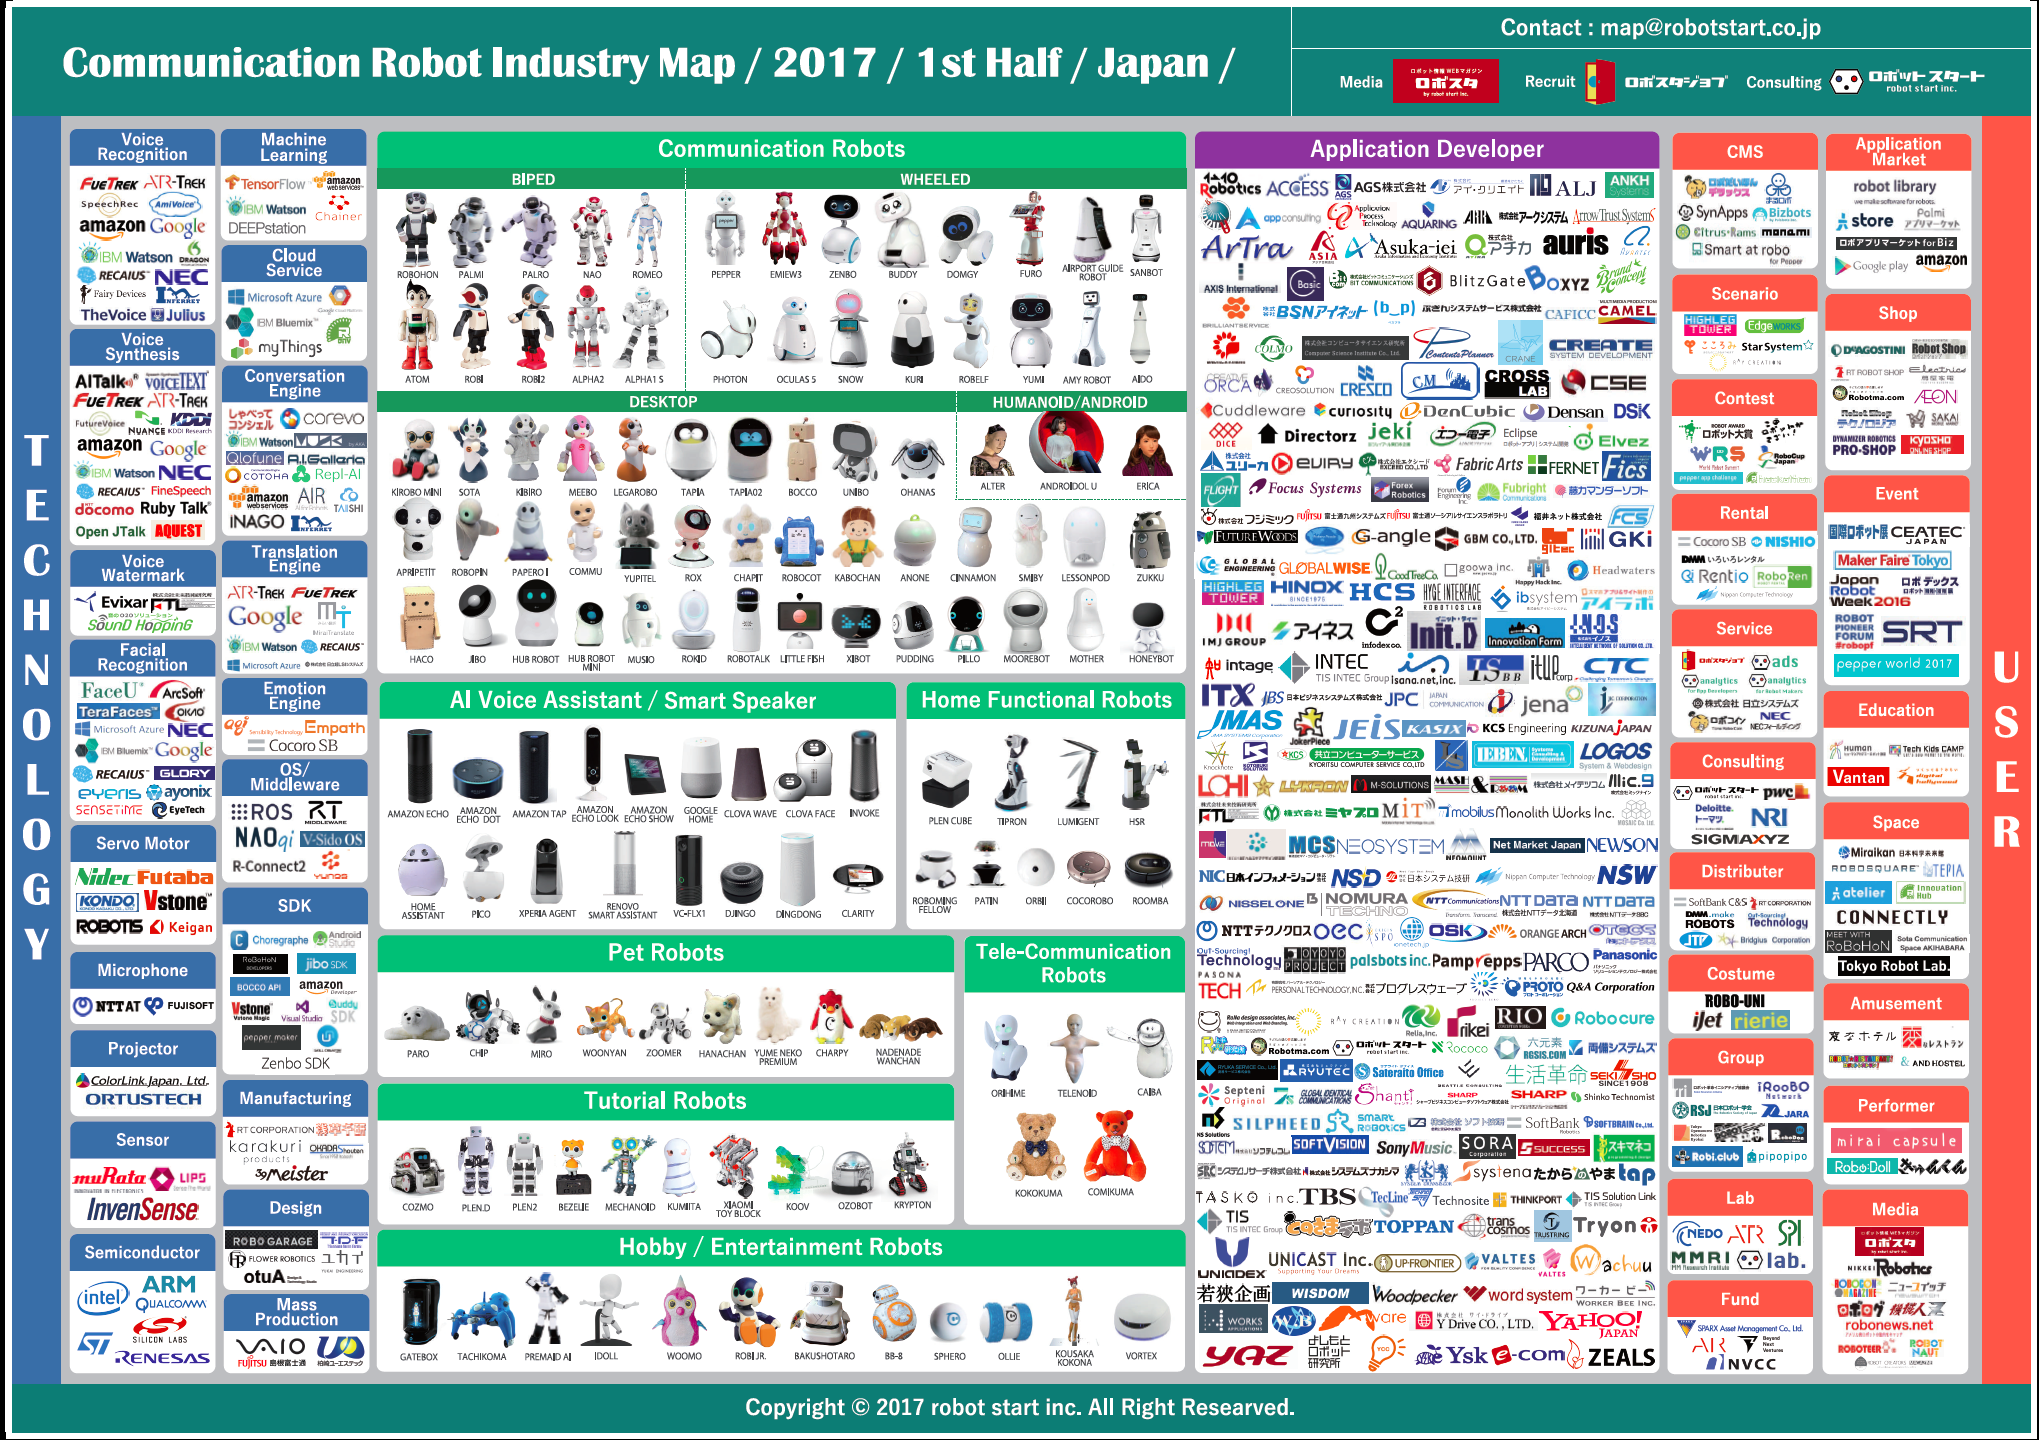 Communication Robot Industry Map 2017